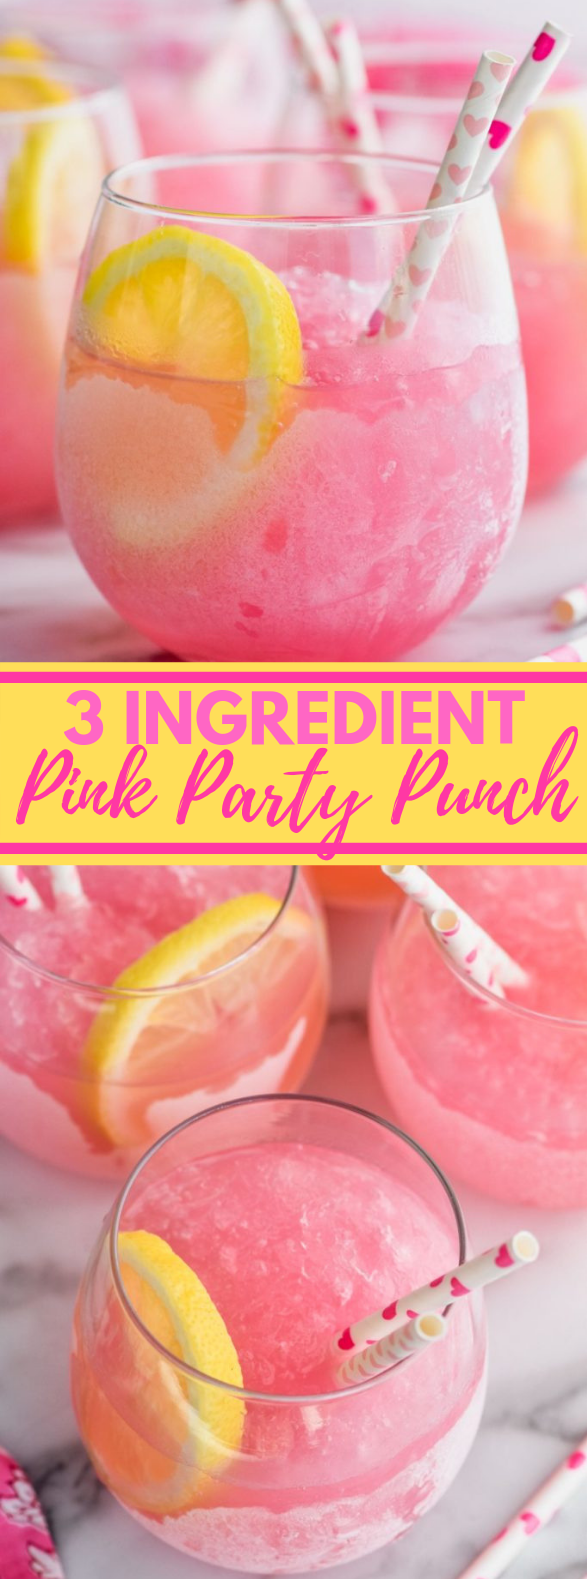 THREE INGREDIENT PINK PARTY PUNCH #drinks #summerparty